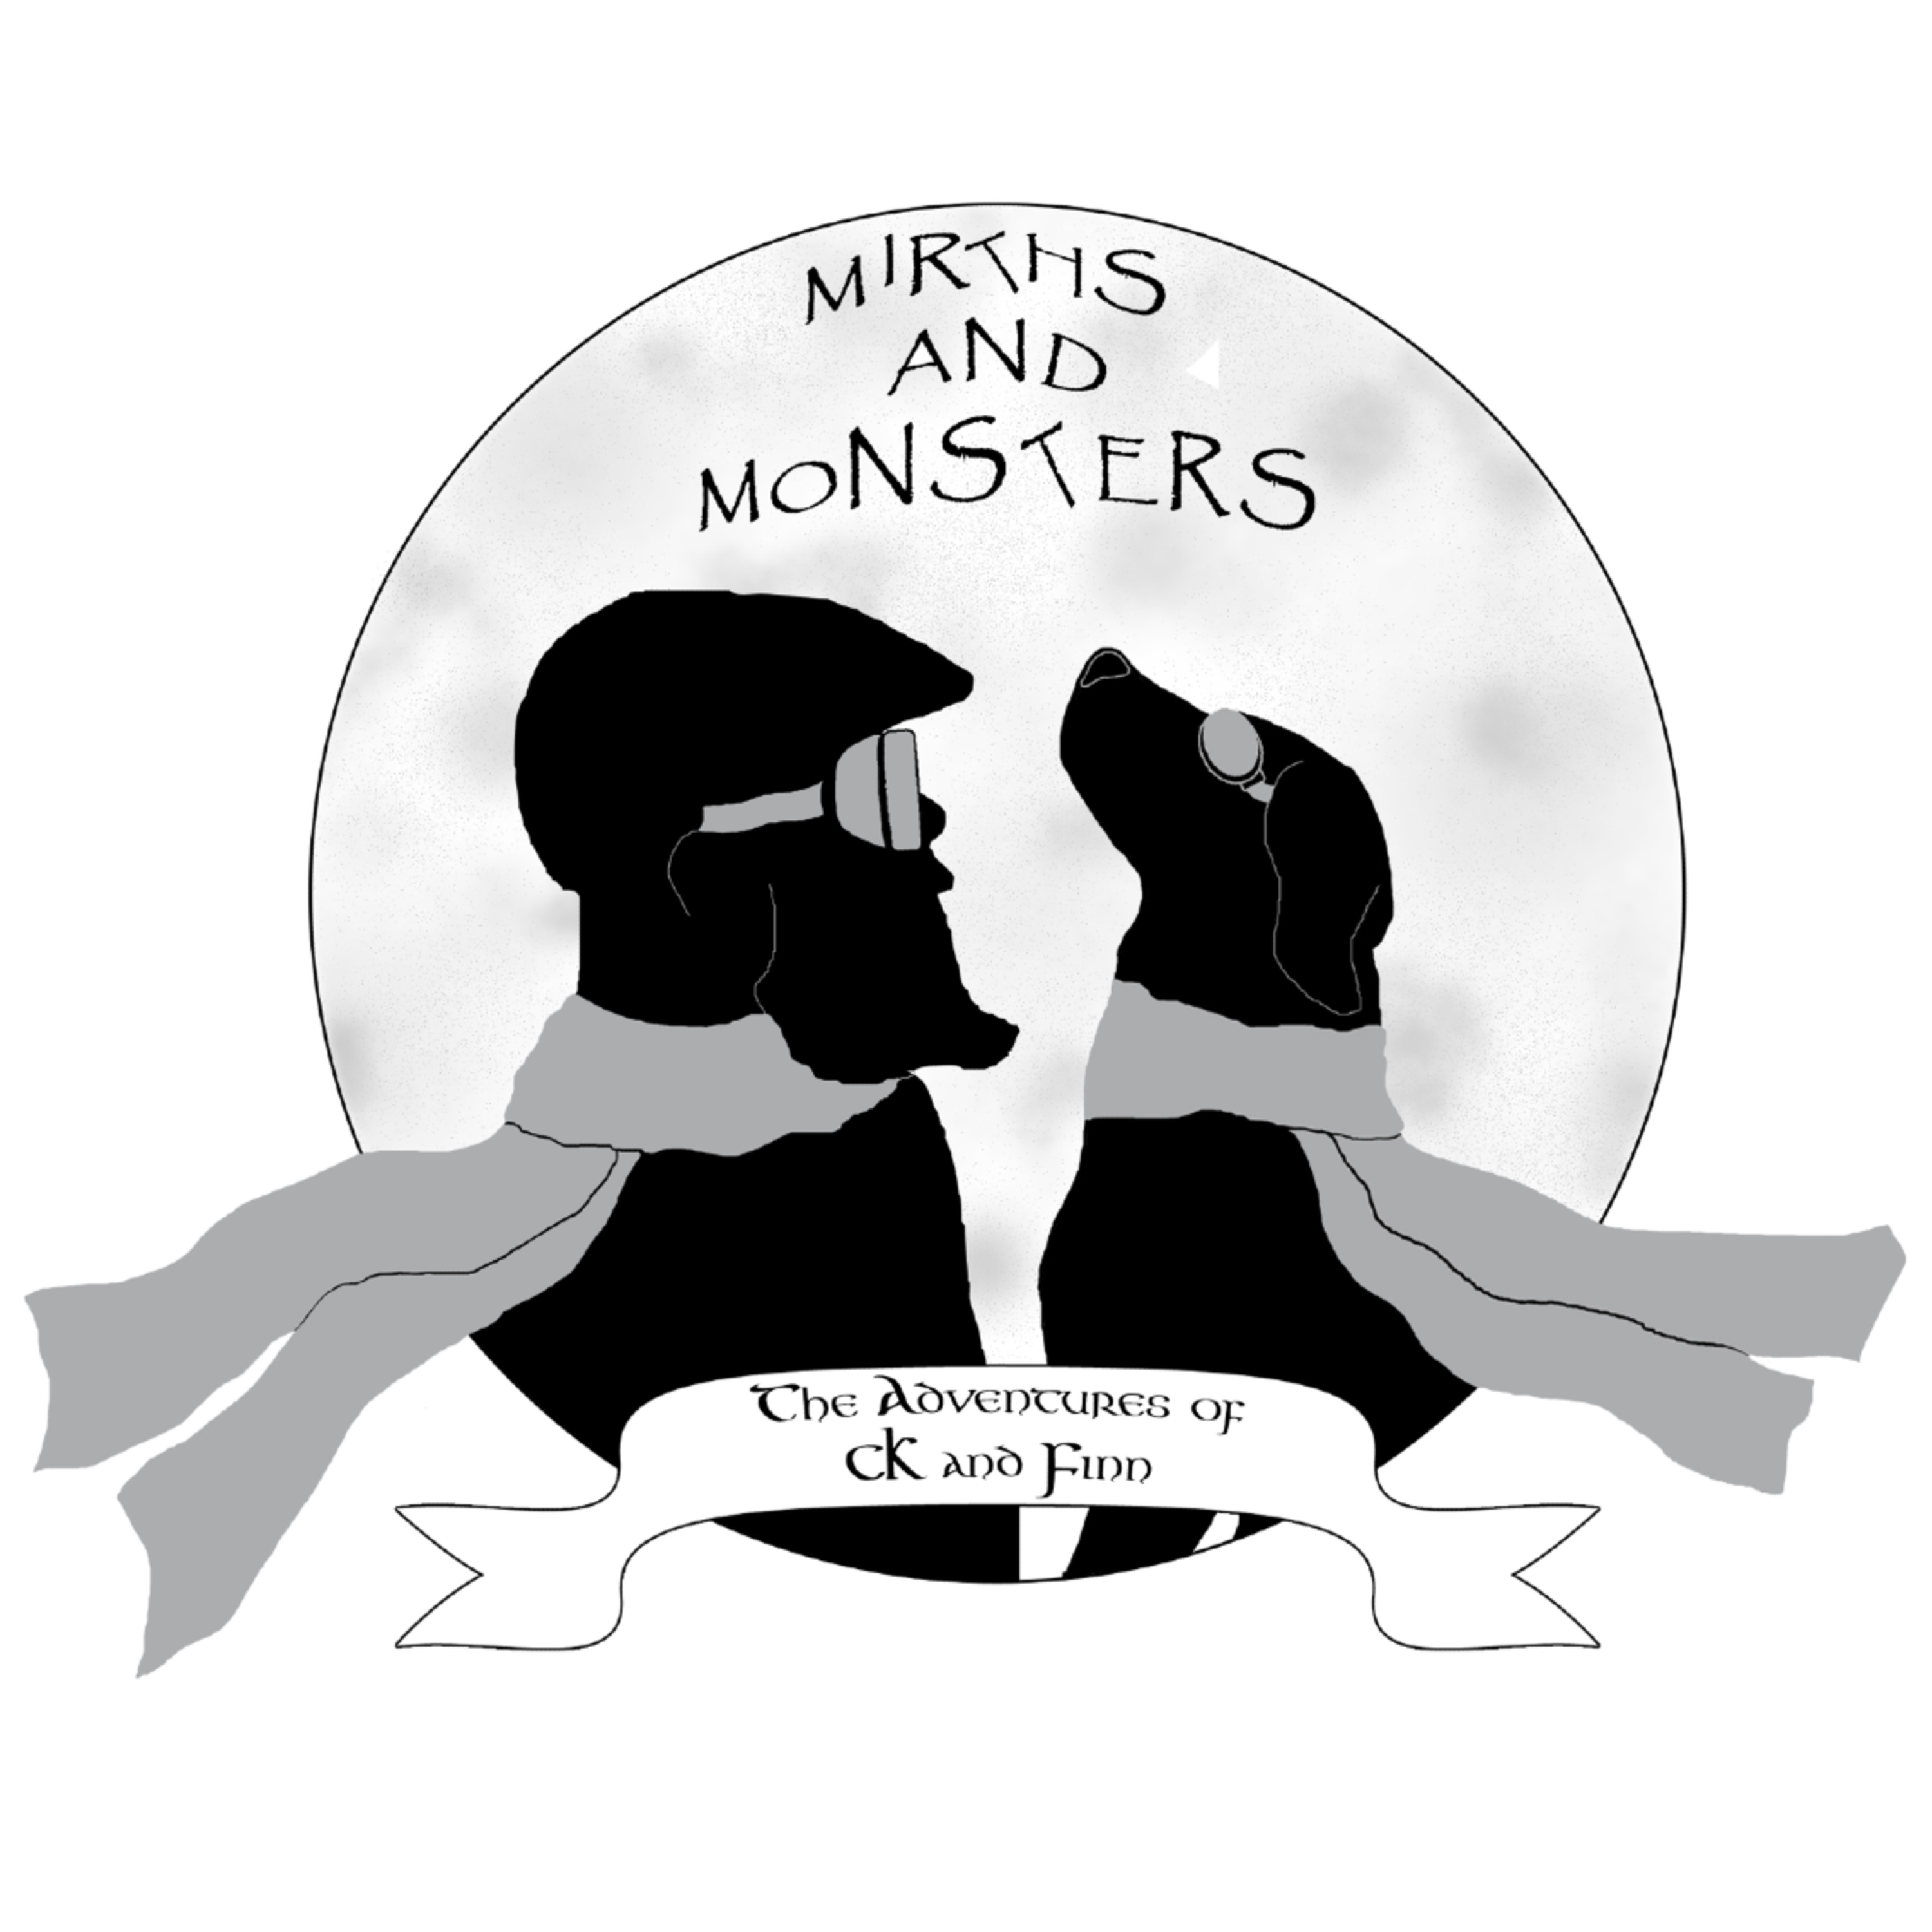 Mirths and Monsters-The Winchester House part 3